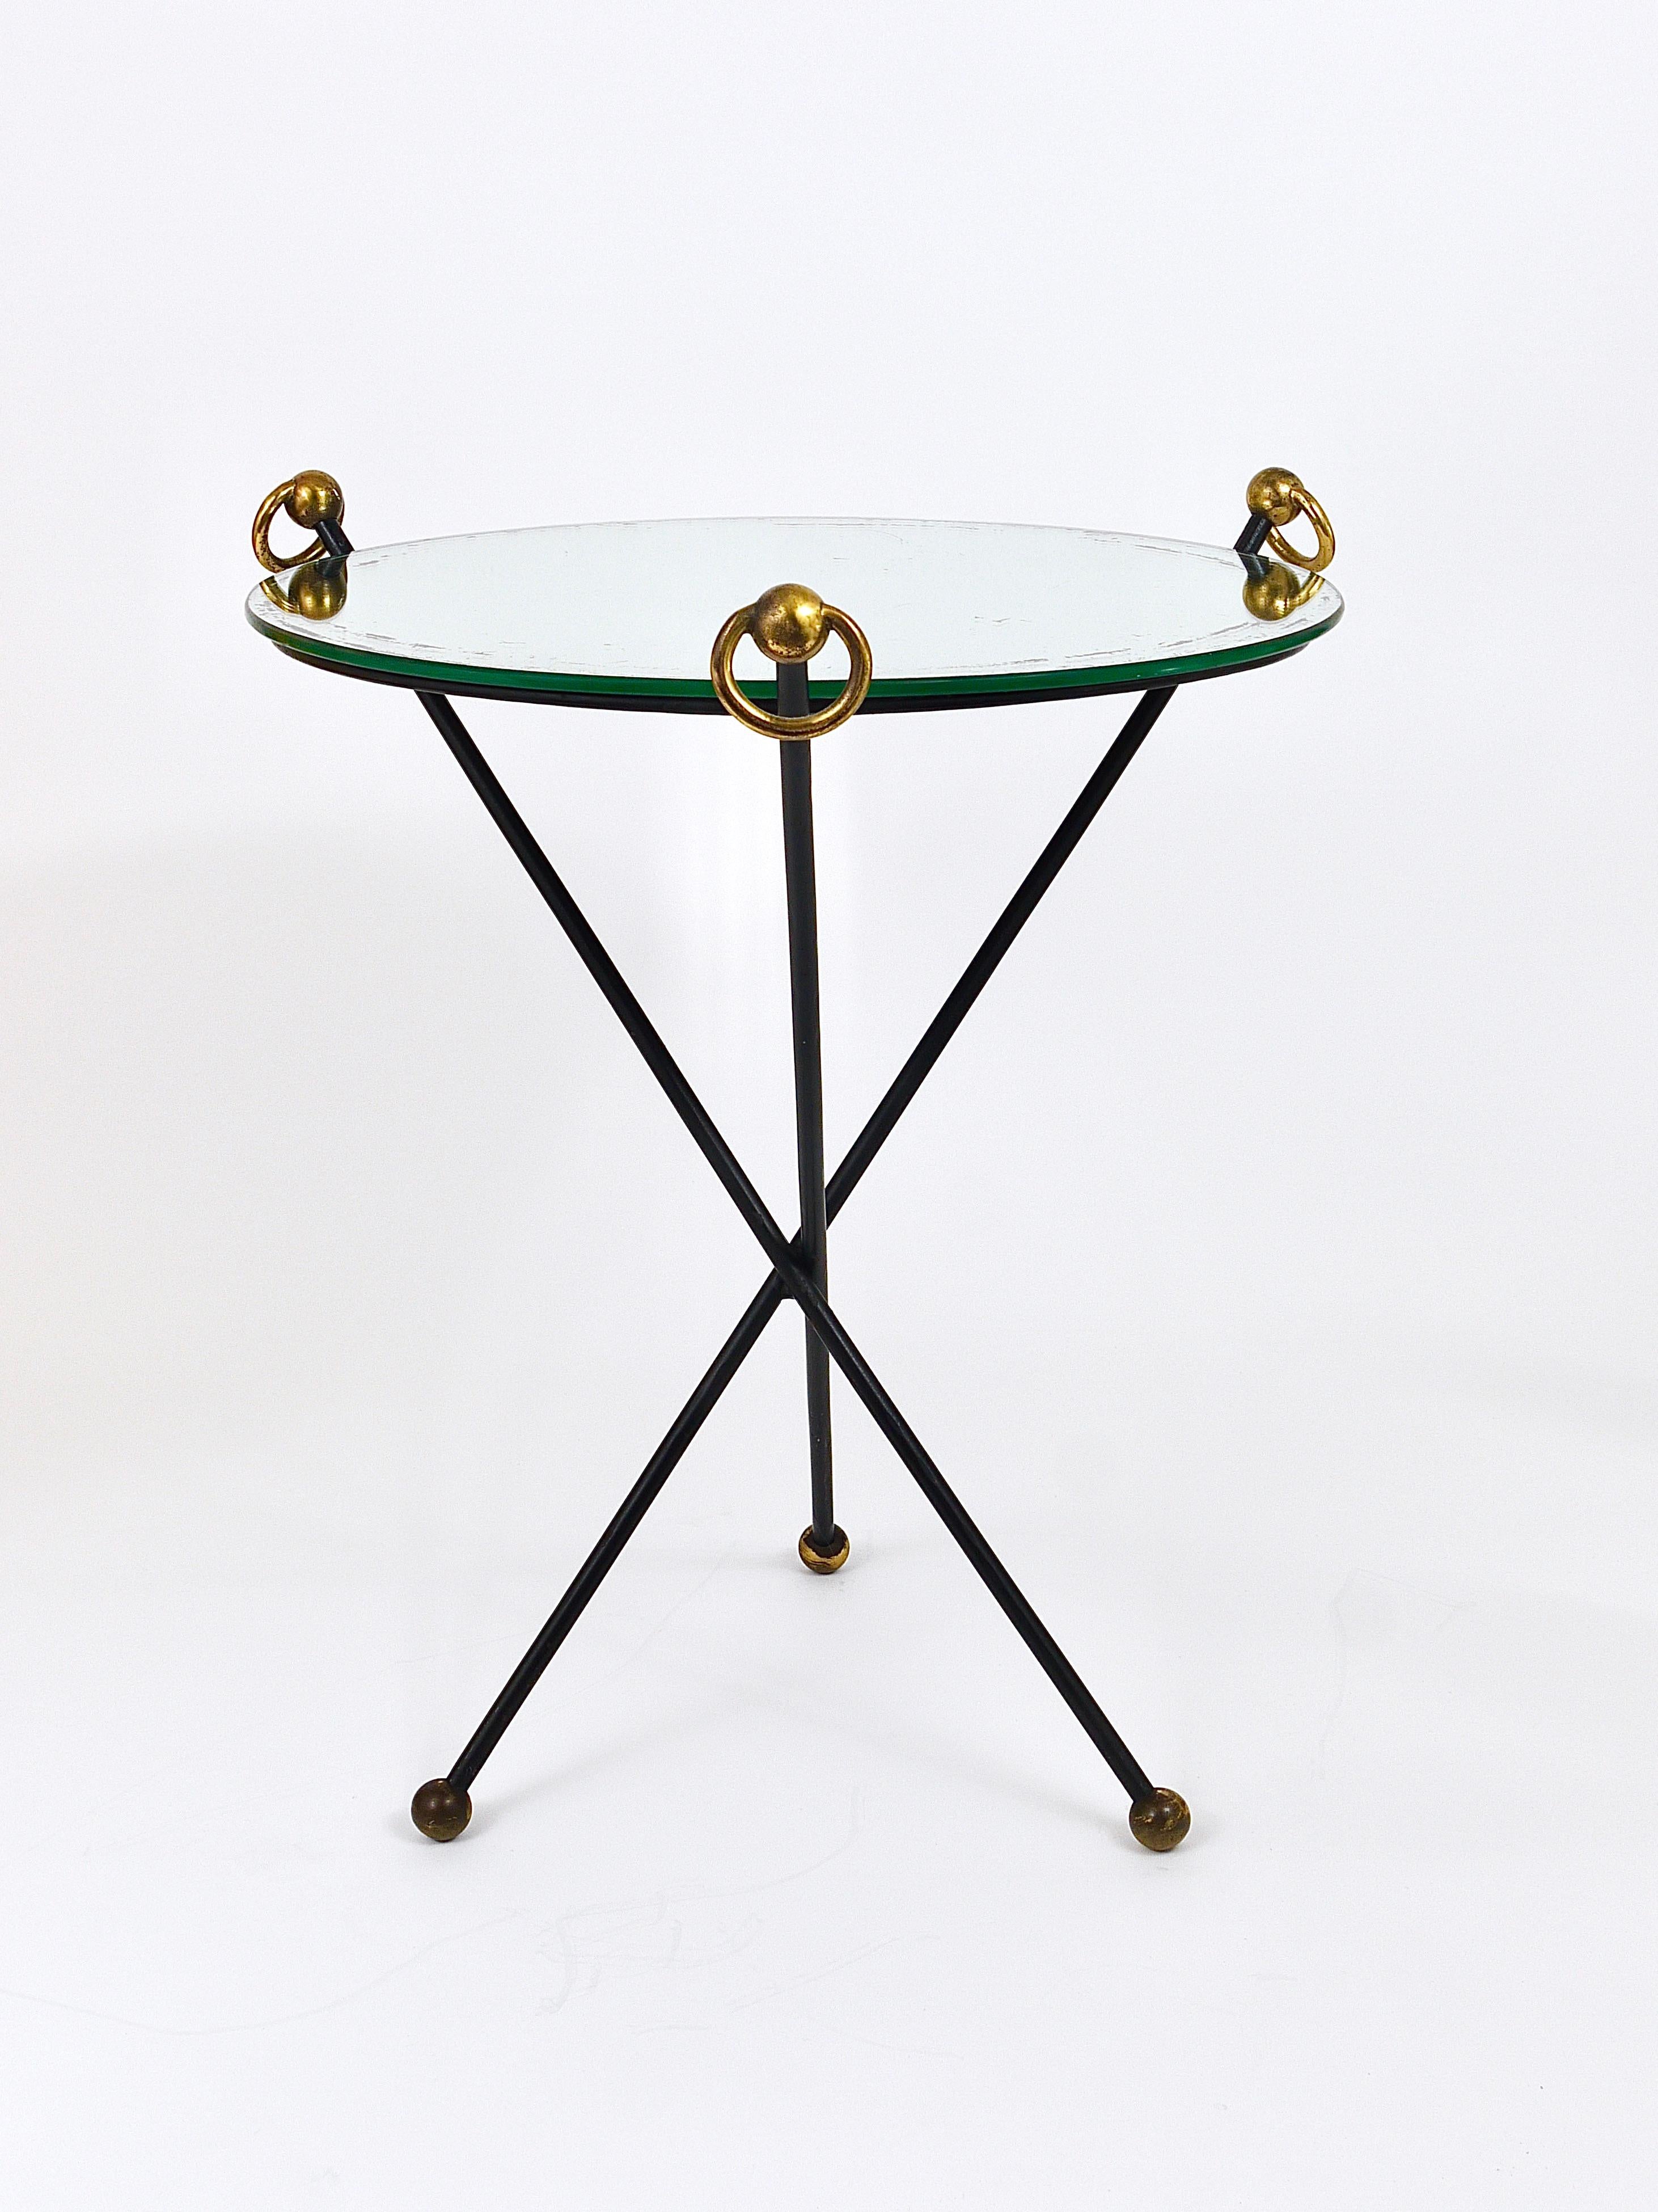 A lovely and elegant, petite round neoclassical tripod side or coffee table / guerdon / pedestal from the 1950s, handmade in France. In the style of Jacques Adnet. It consists of a classic tripod table base made of black-finished iron with beautiful